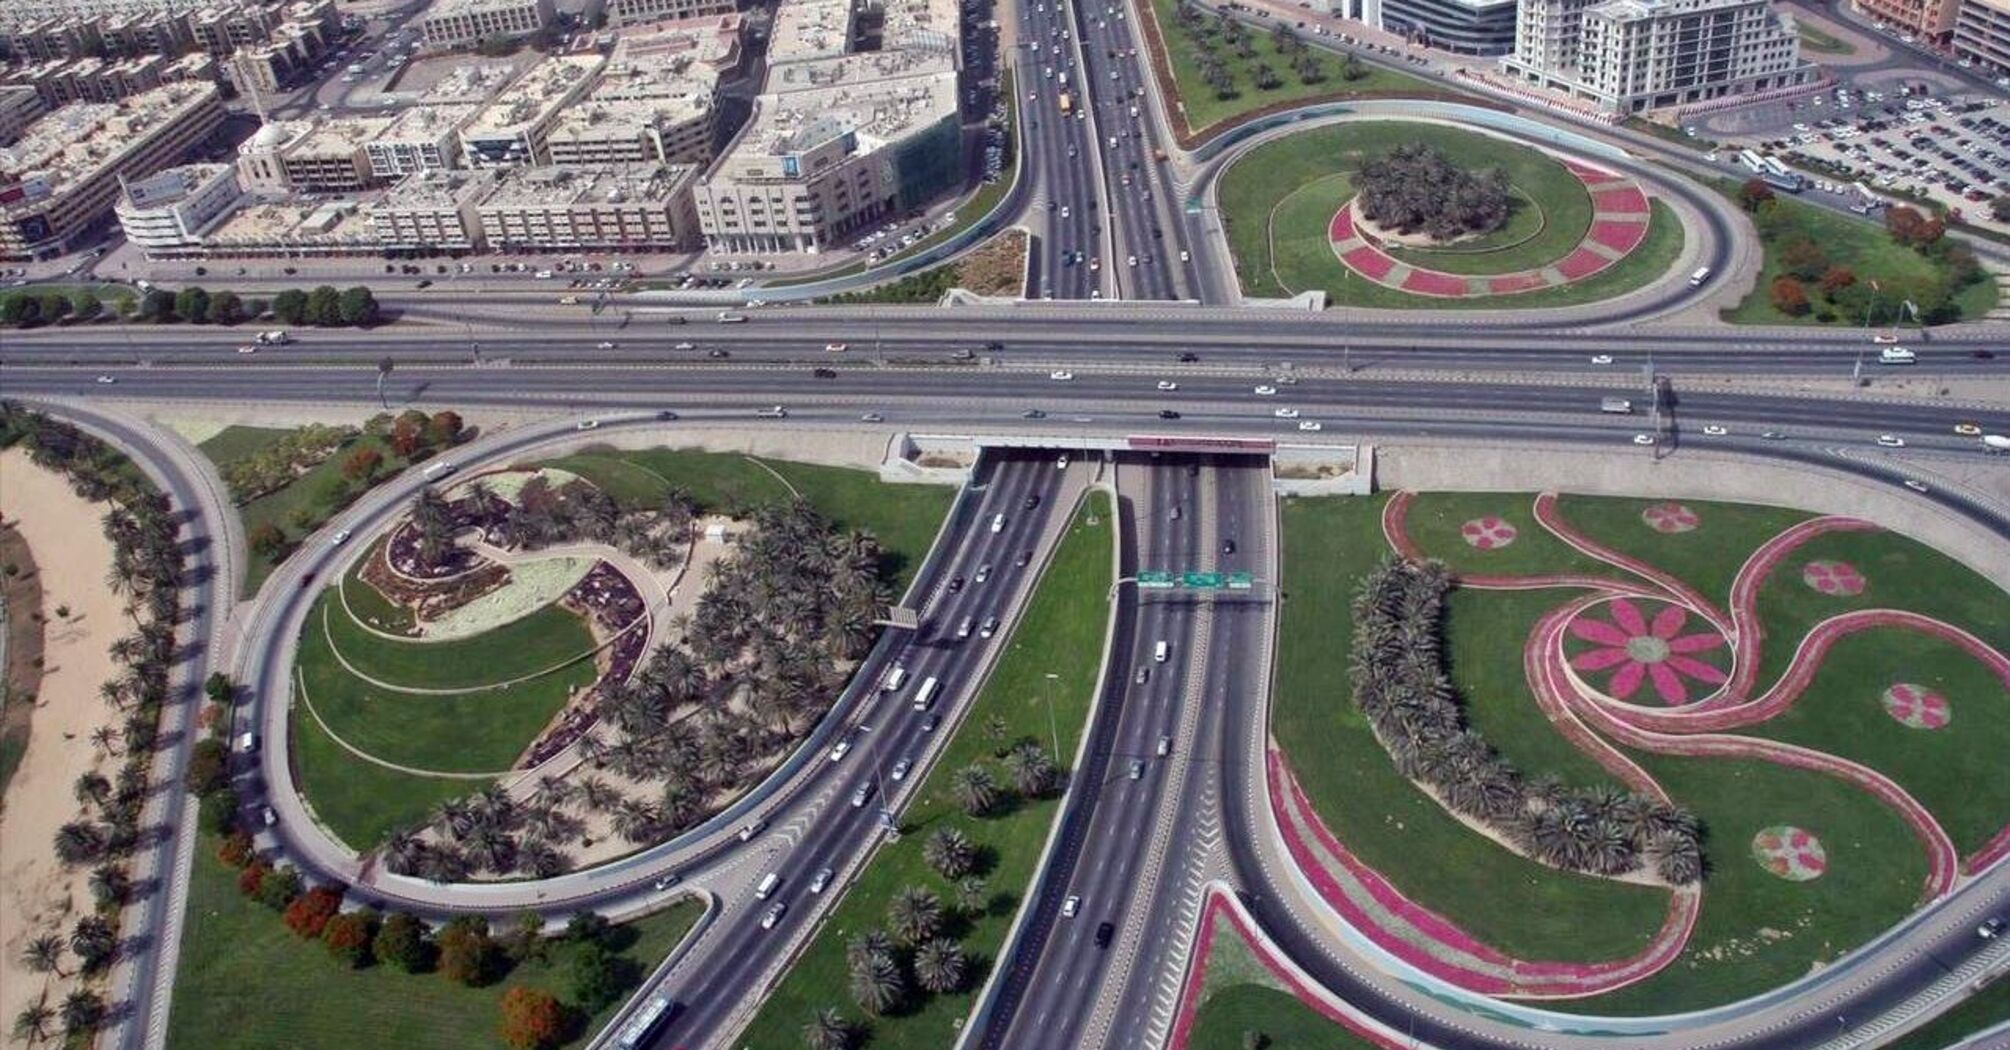 Efficient development: How public transport is changing the image of Abu Dhabi